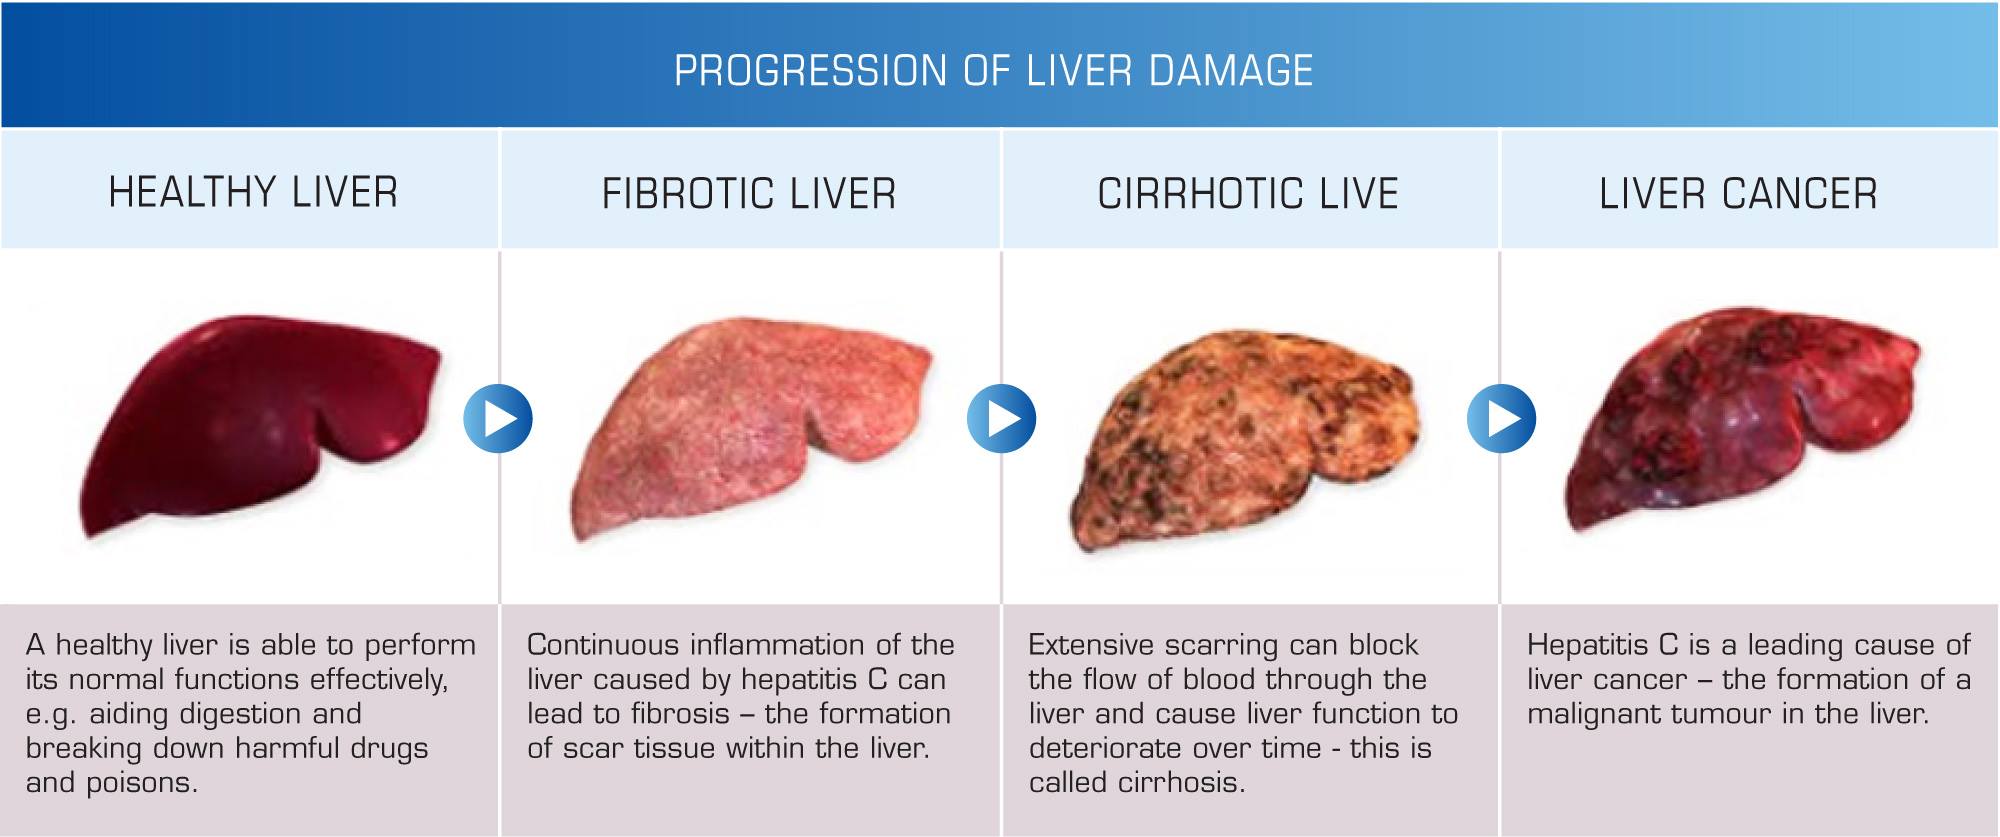 What can cause a blood clot in the liver?